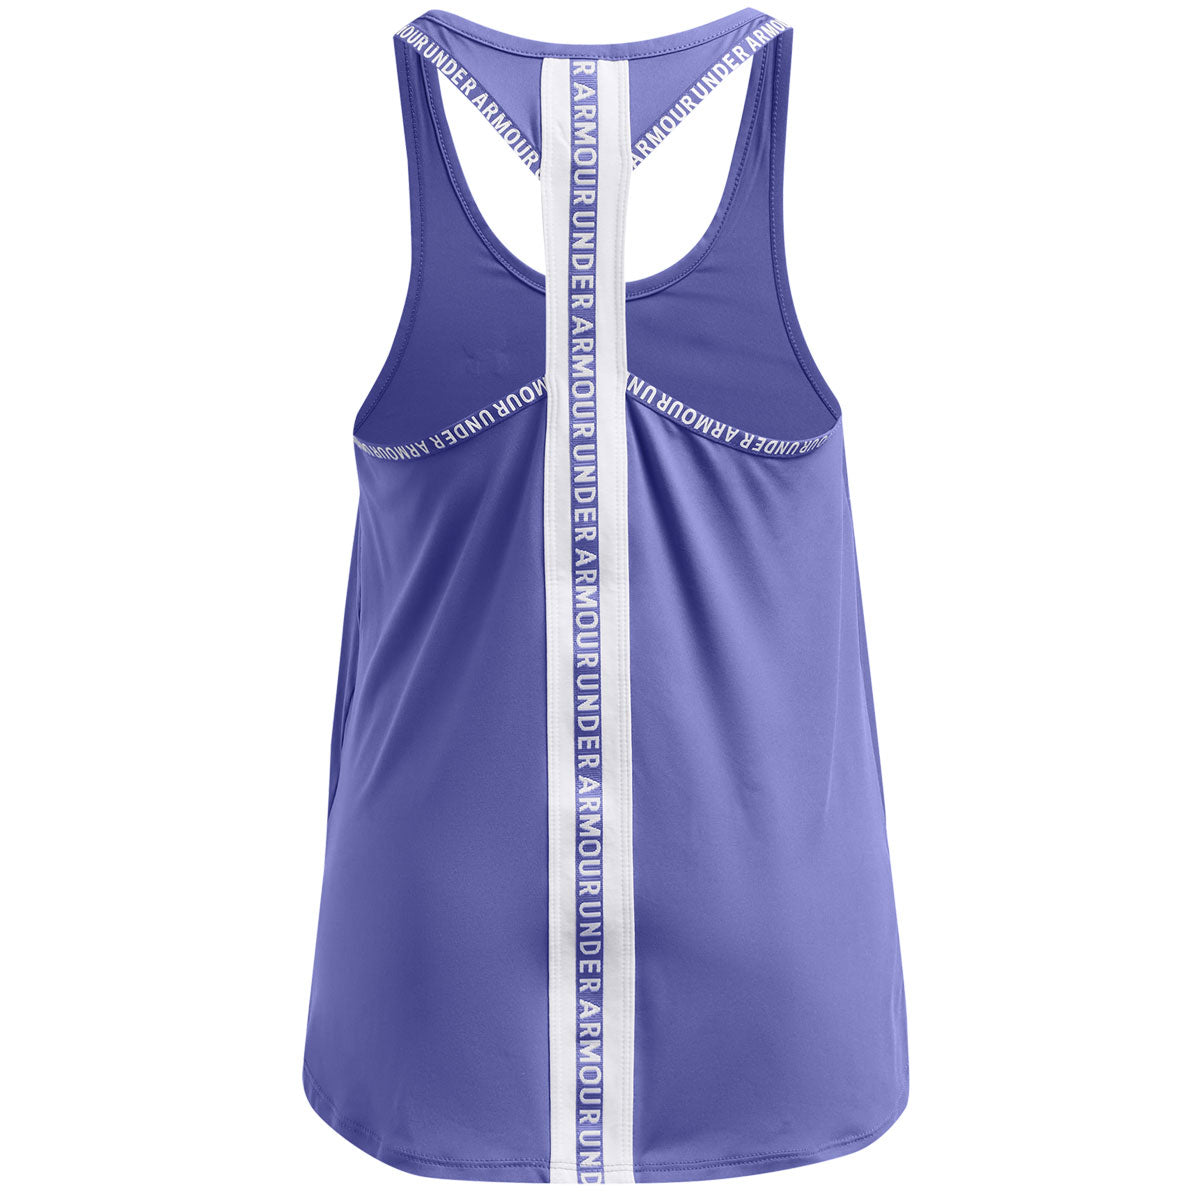 Under Armour Knockout Tank Top - Girls - Starlight/White